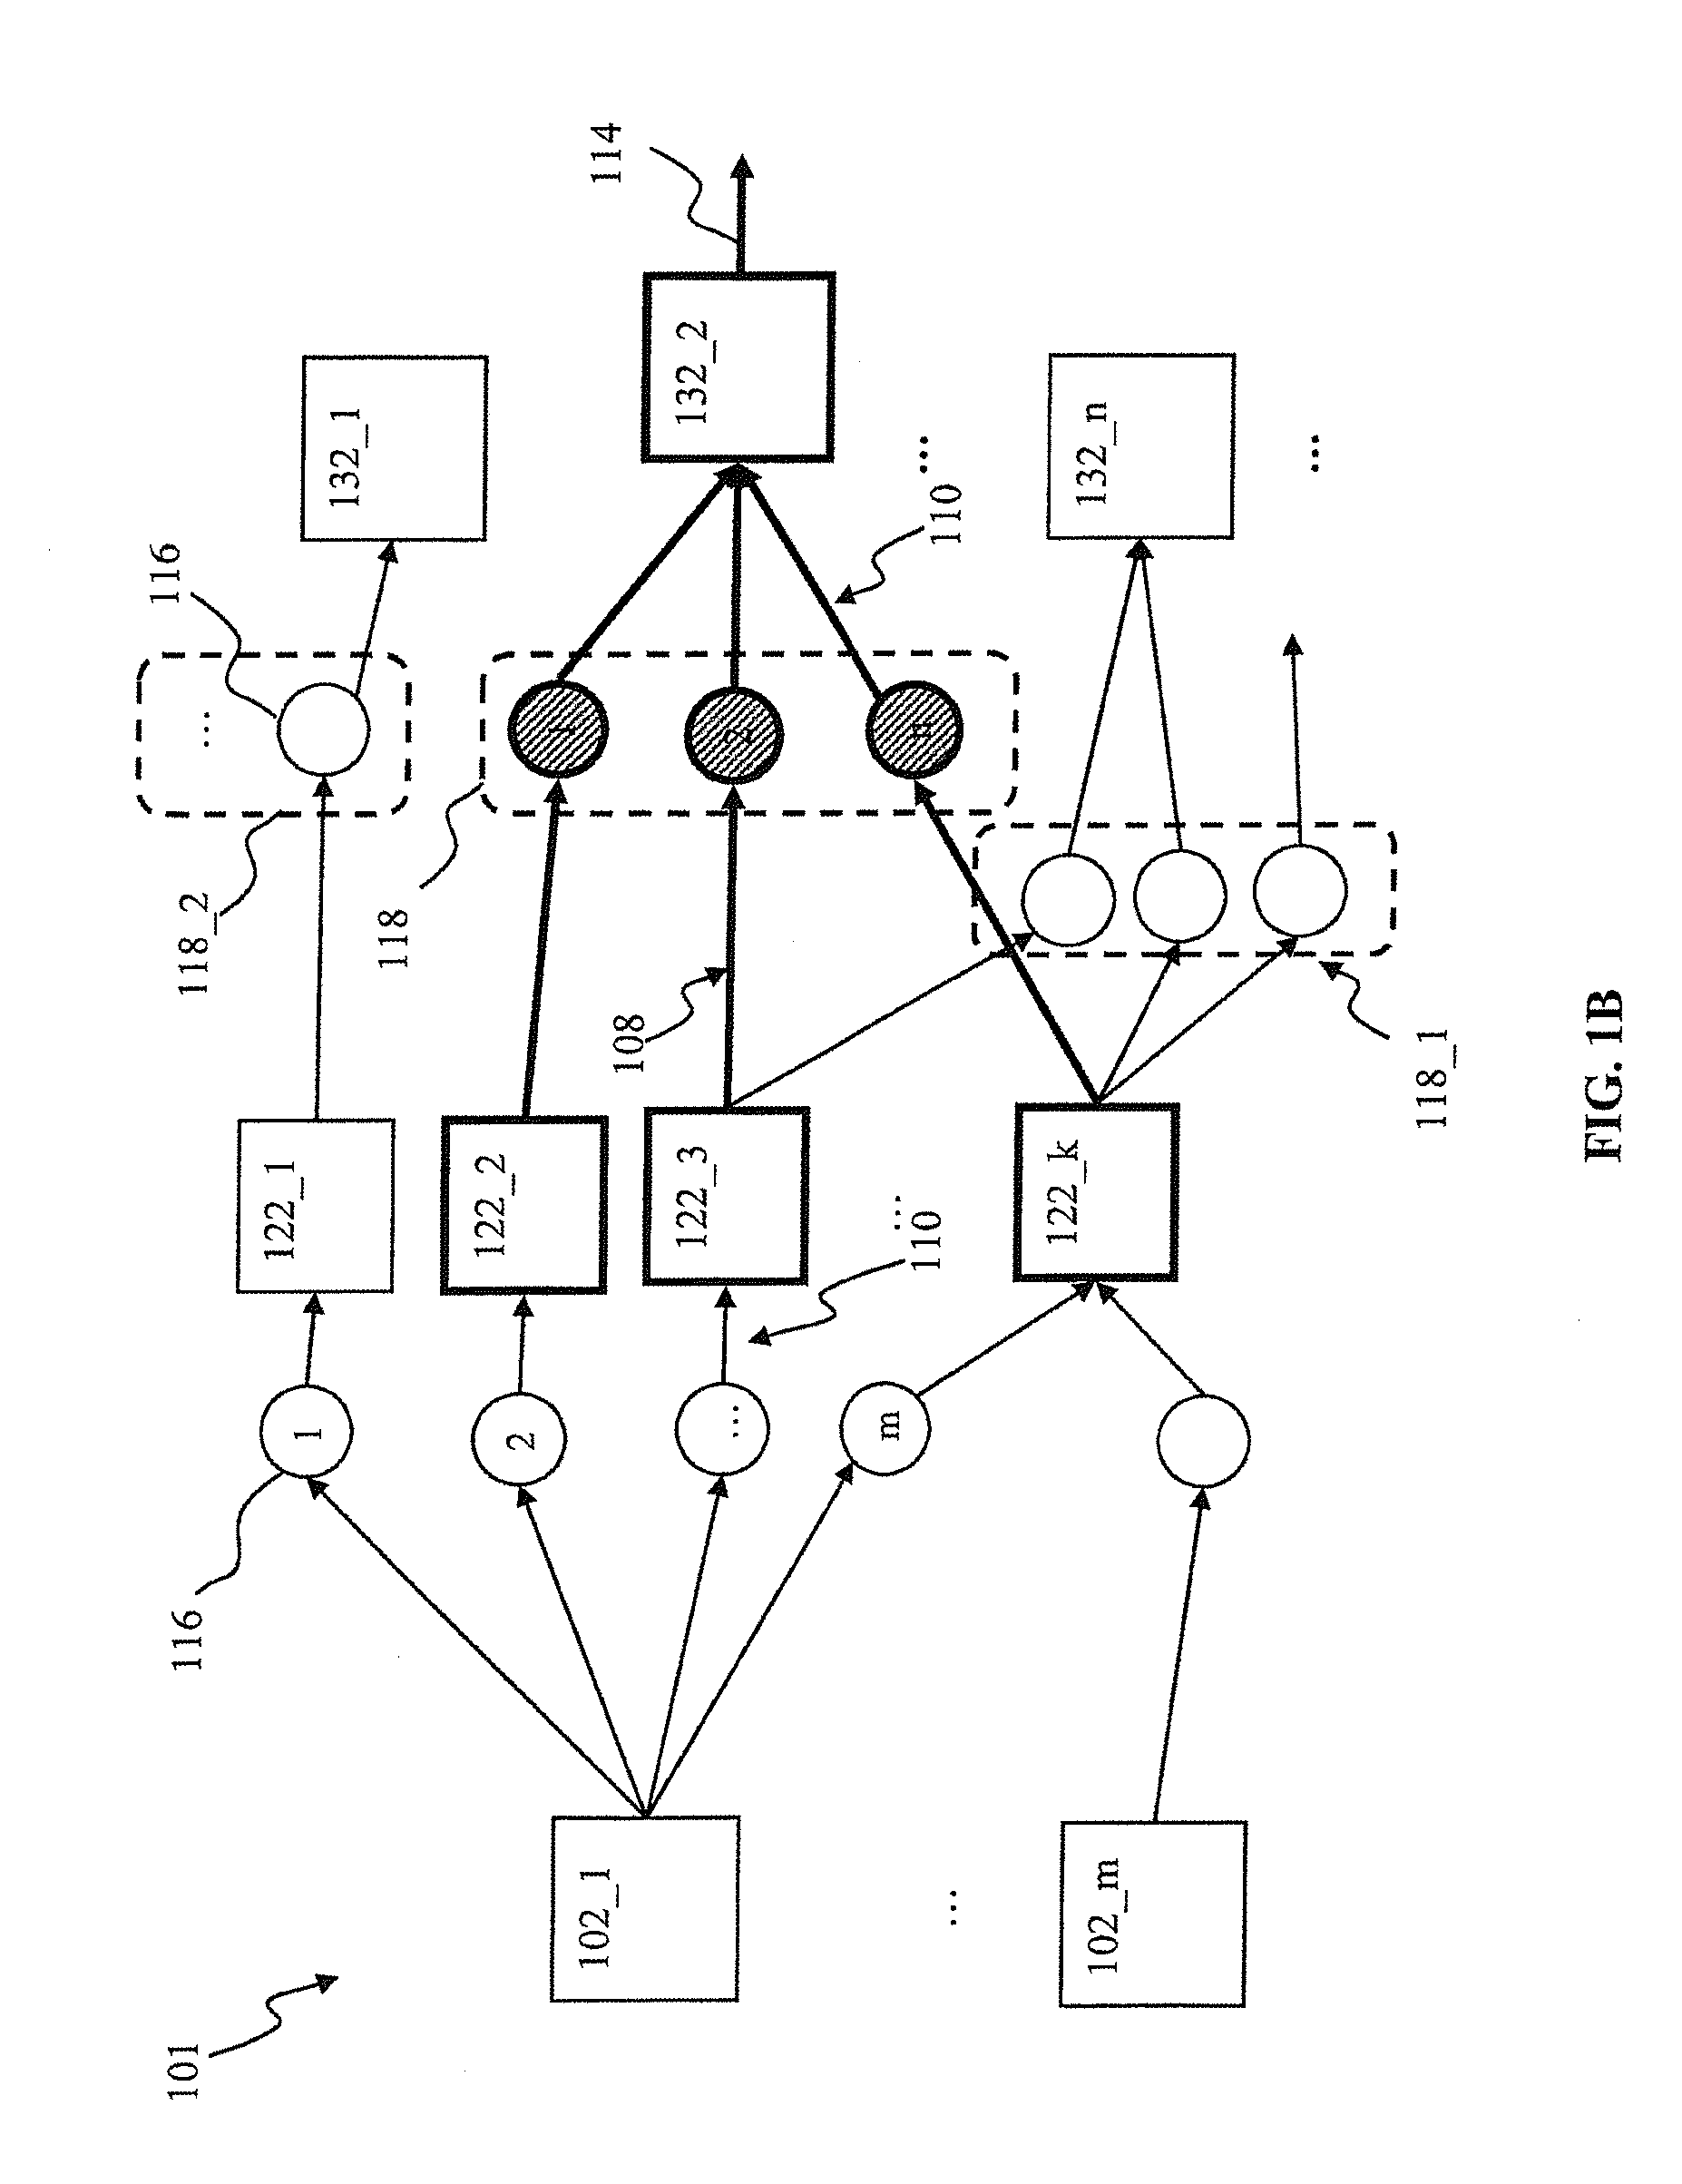 Apparatus and method for partial evaluation of synaptic updates based on system events